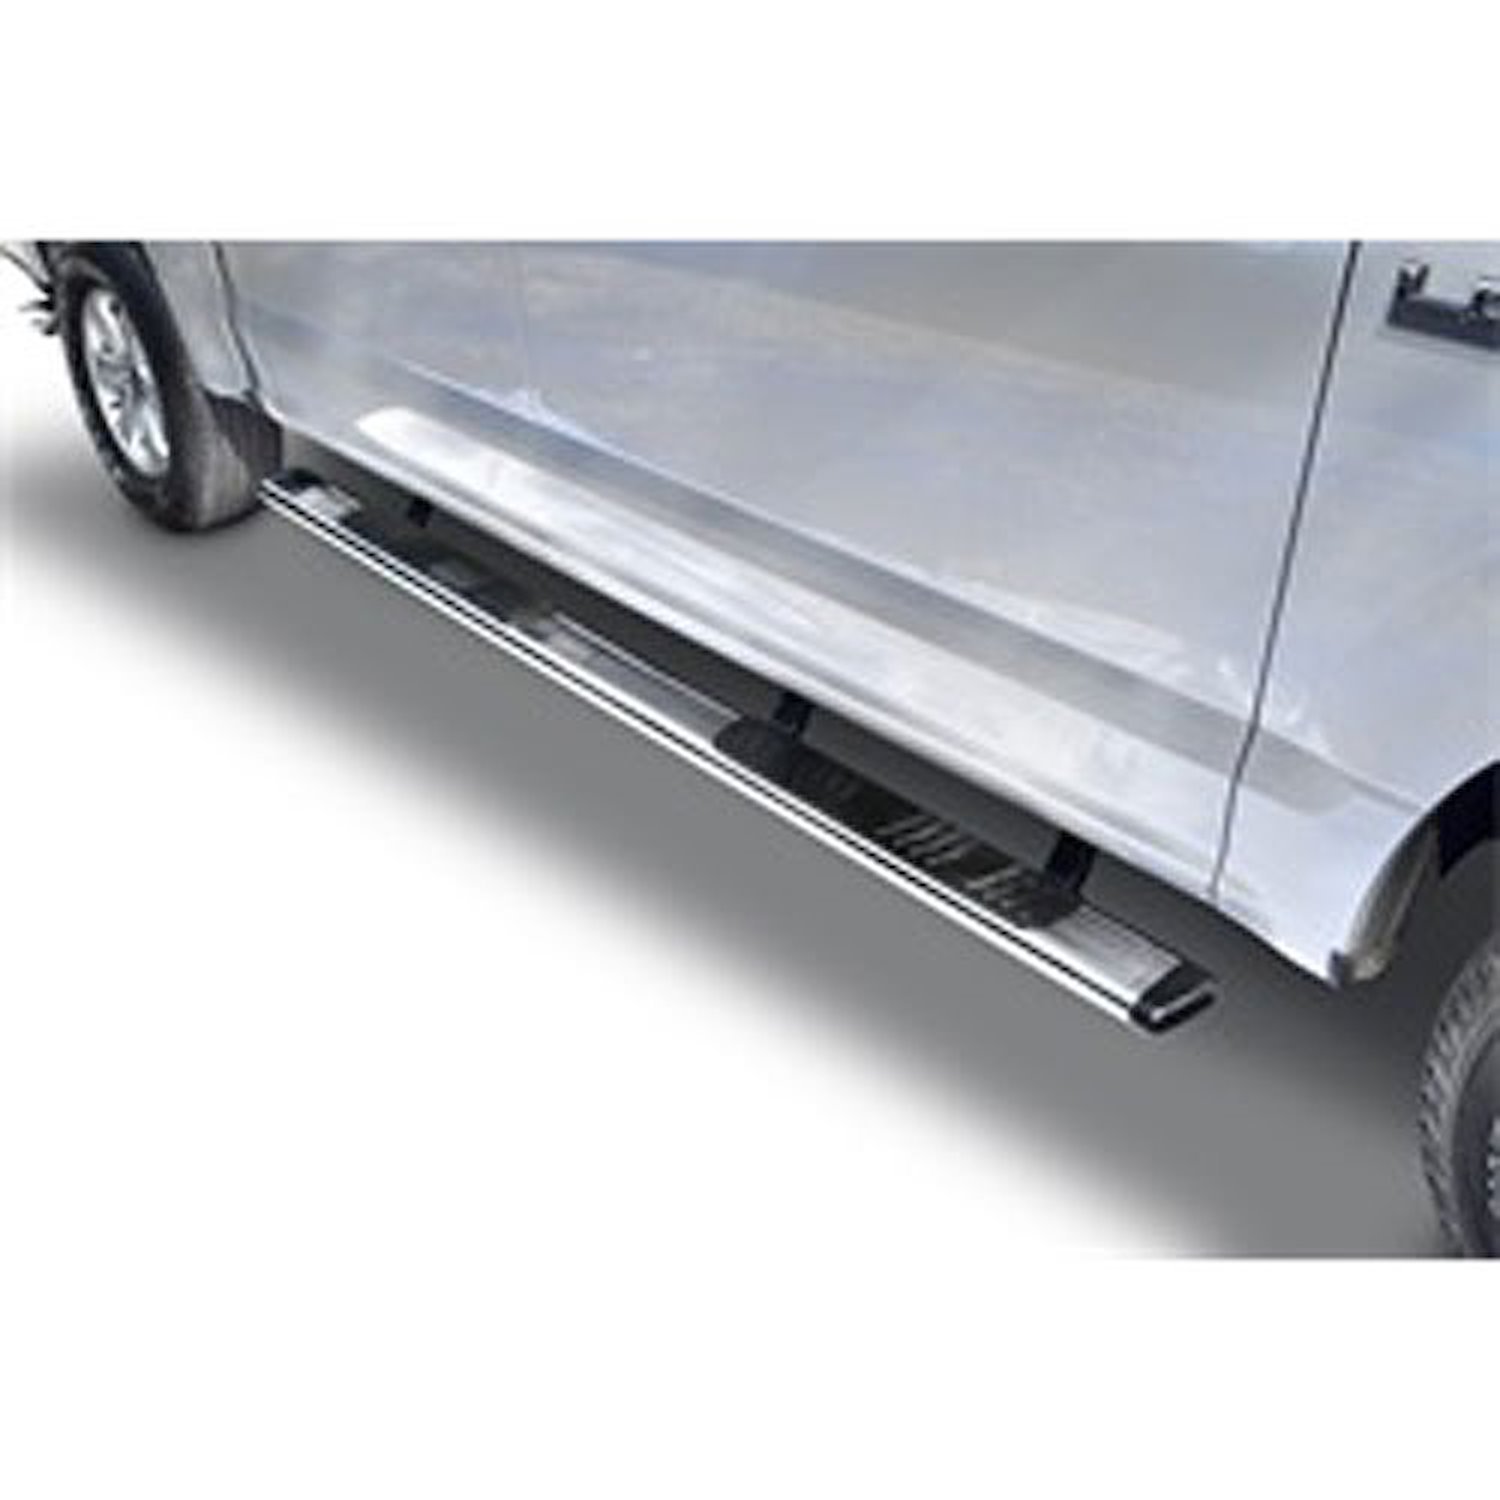 5" OE Xtreme Low Profile SideSteps Kit 2015-16 Ford F-150